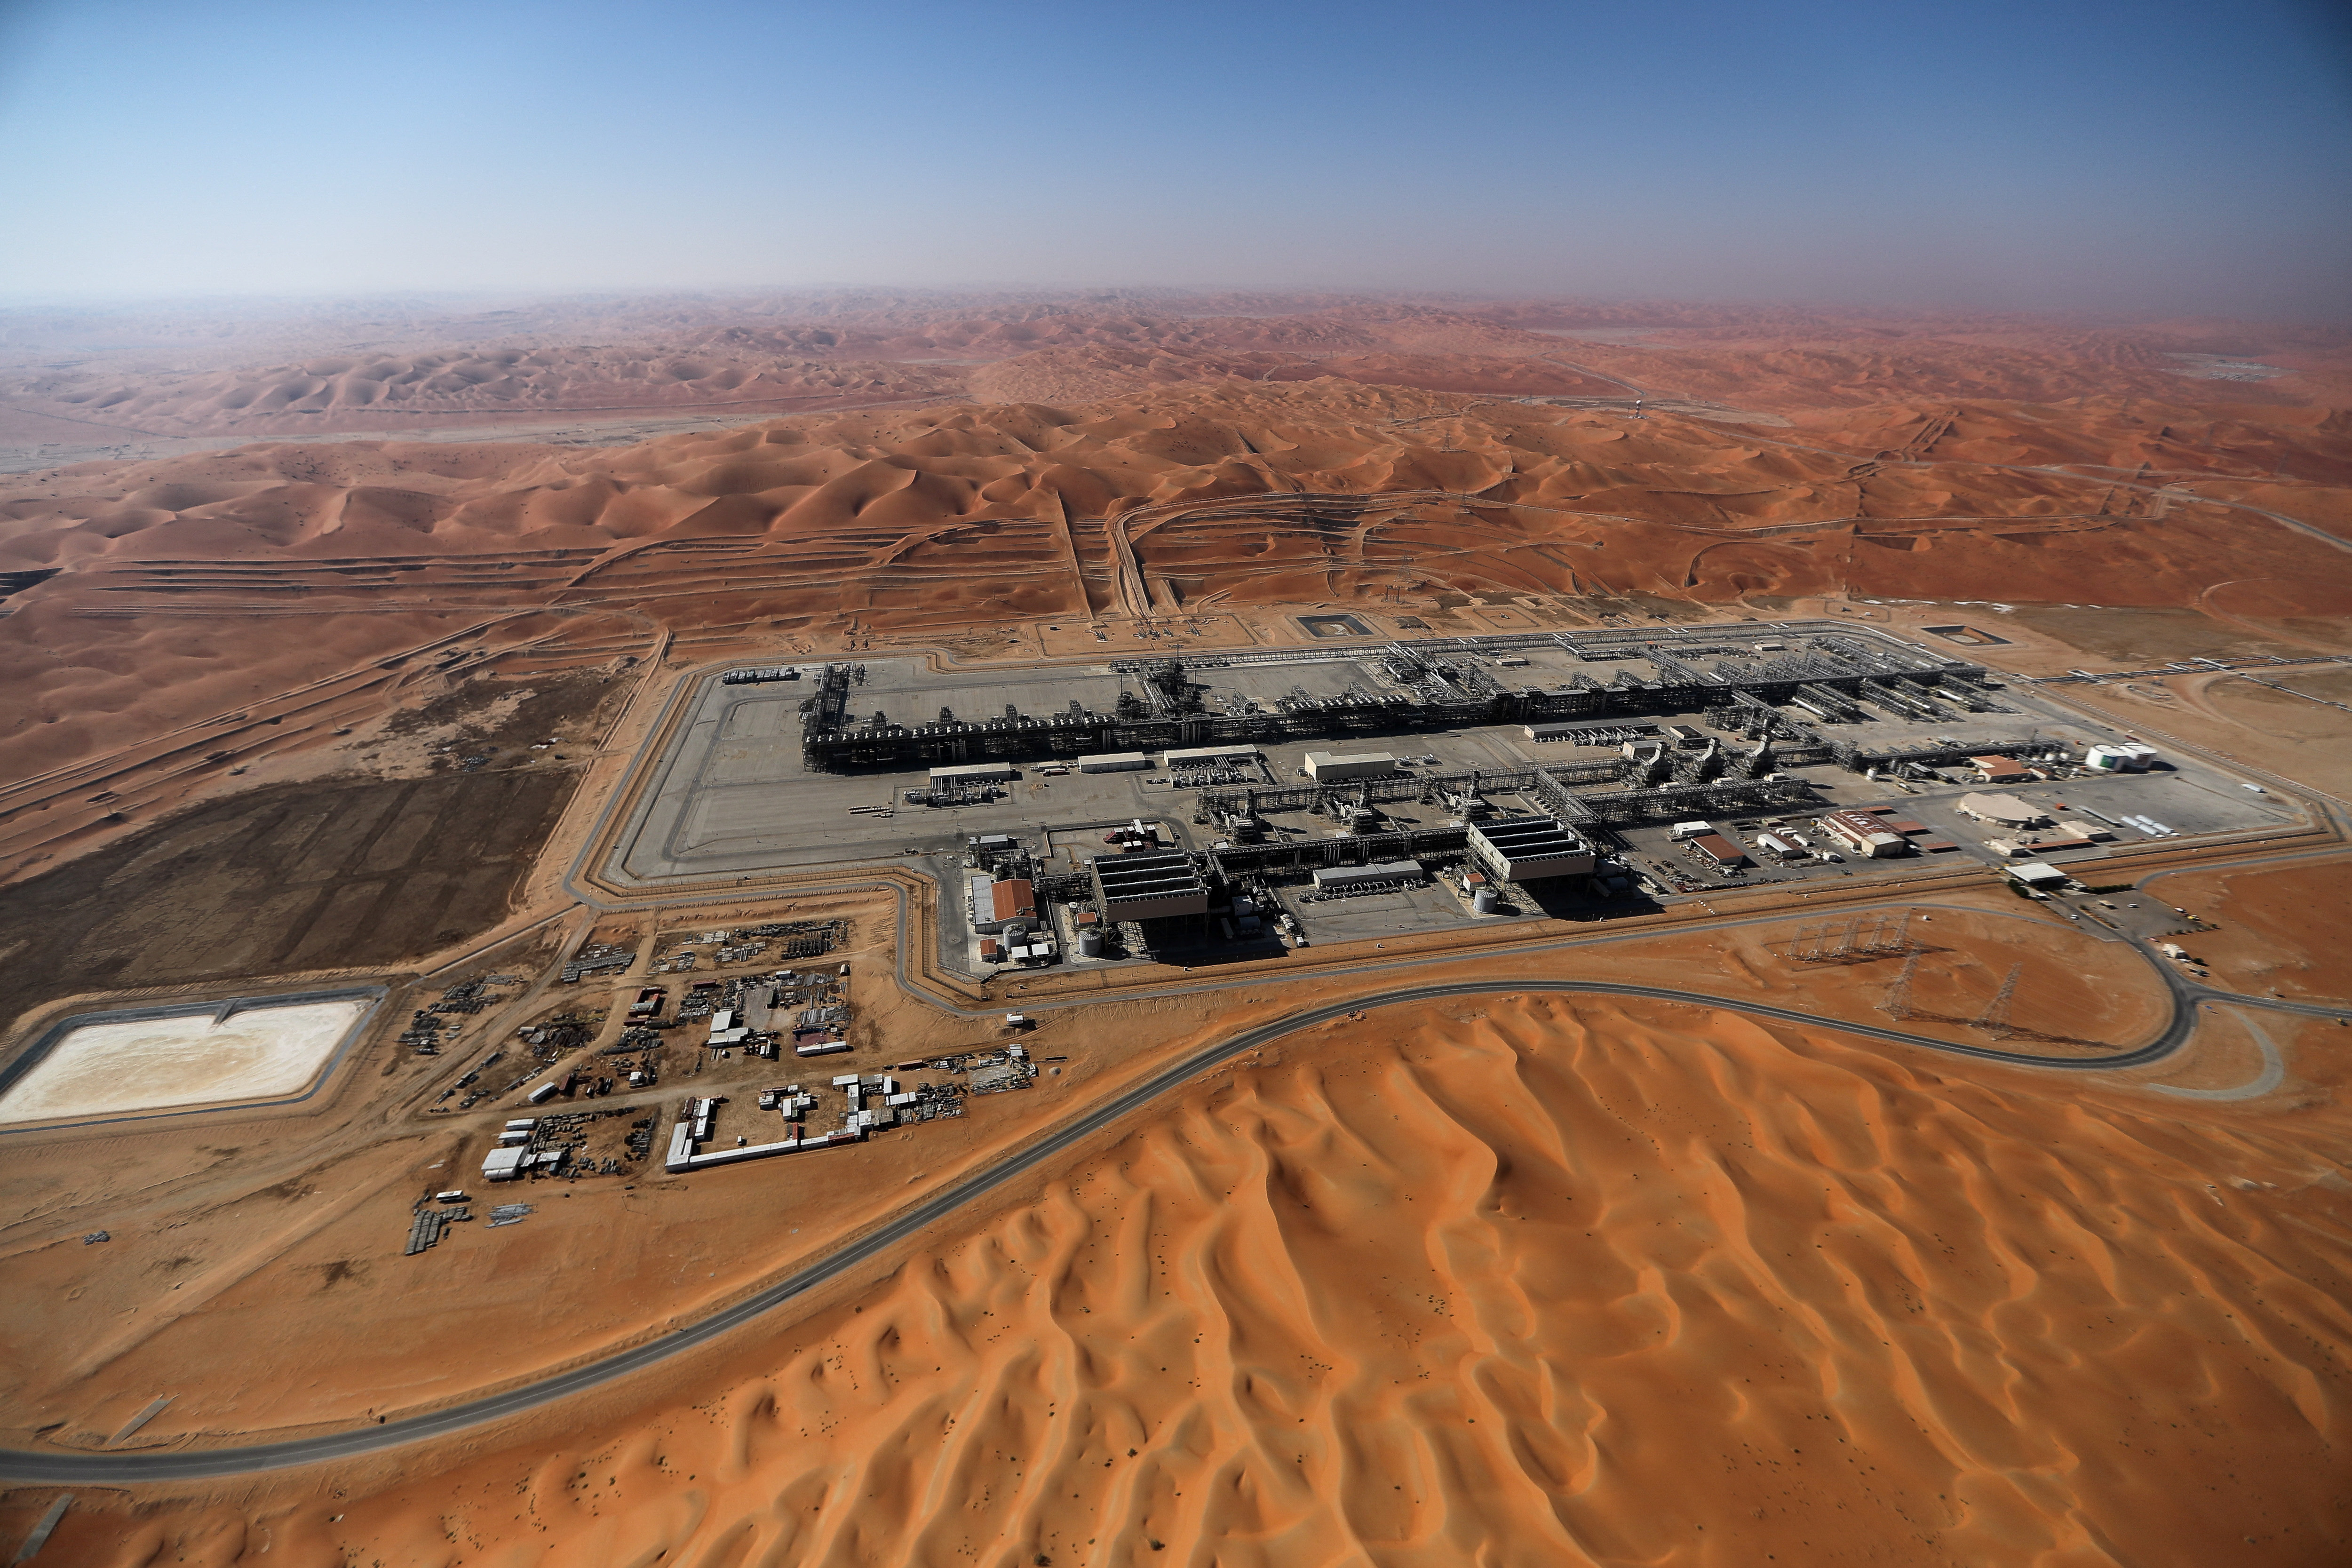 General view of Aramco's oil field in the Empty Quarter